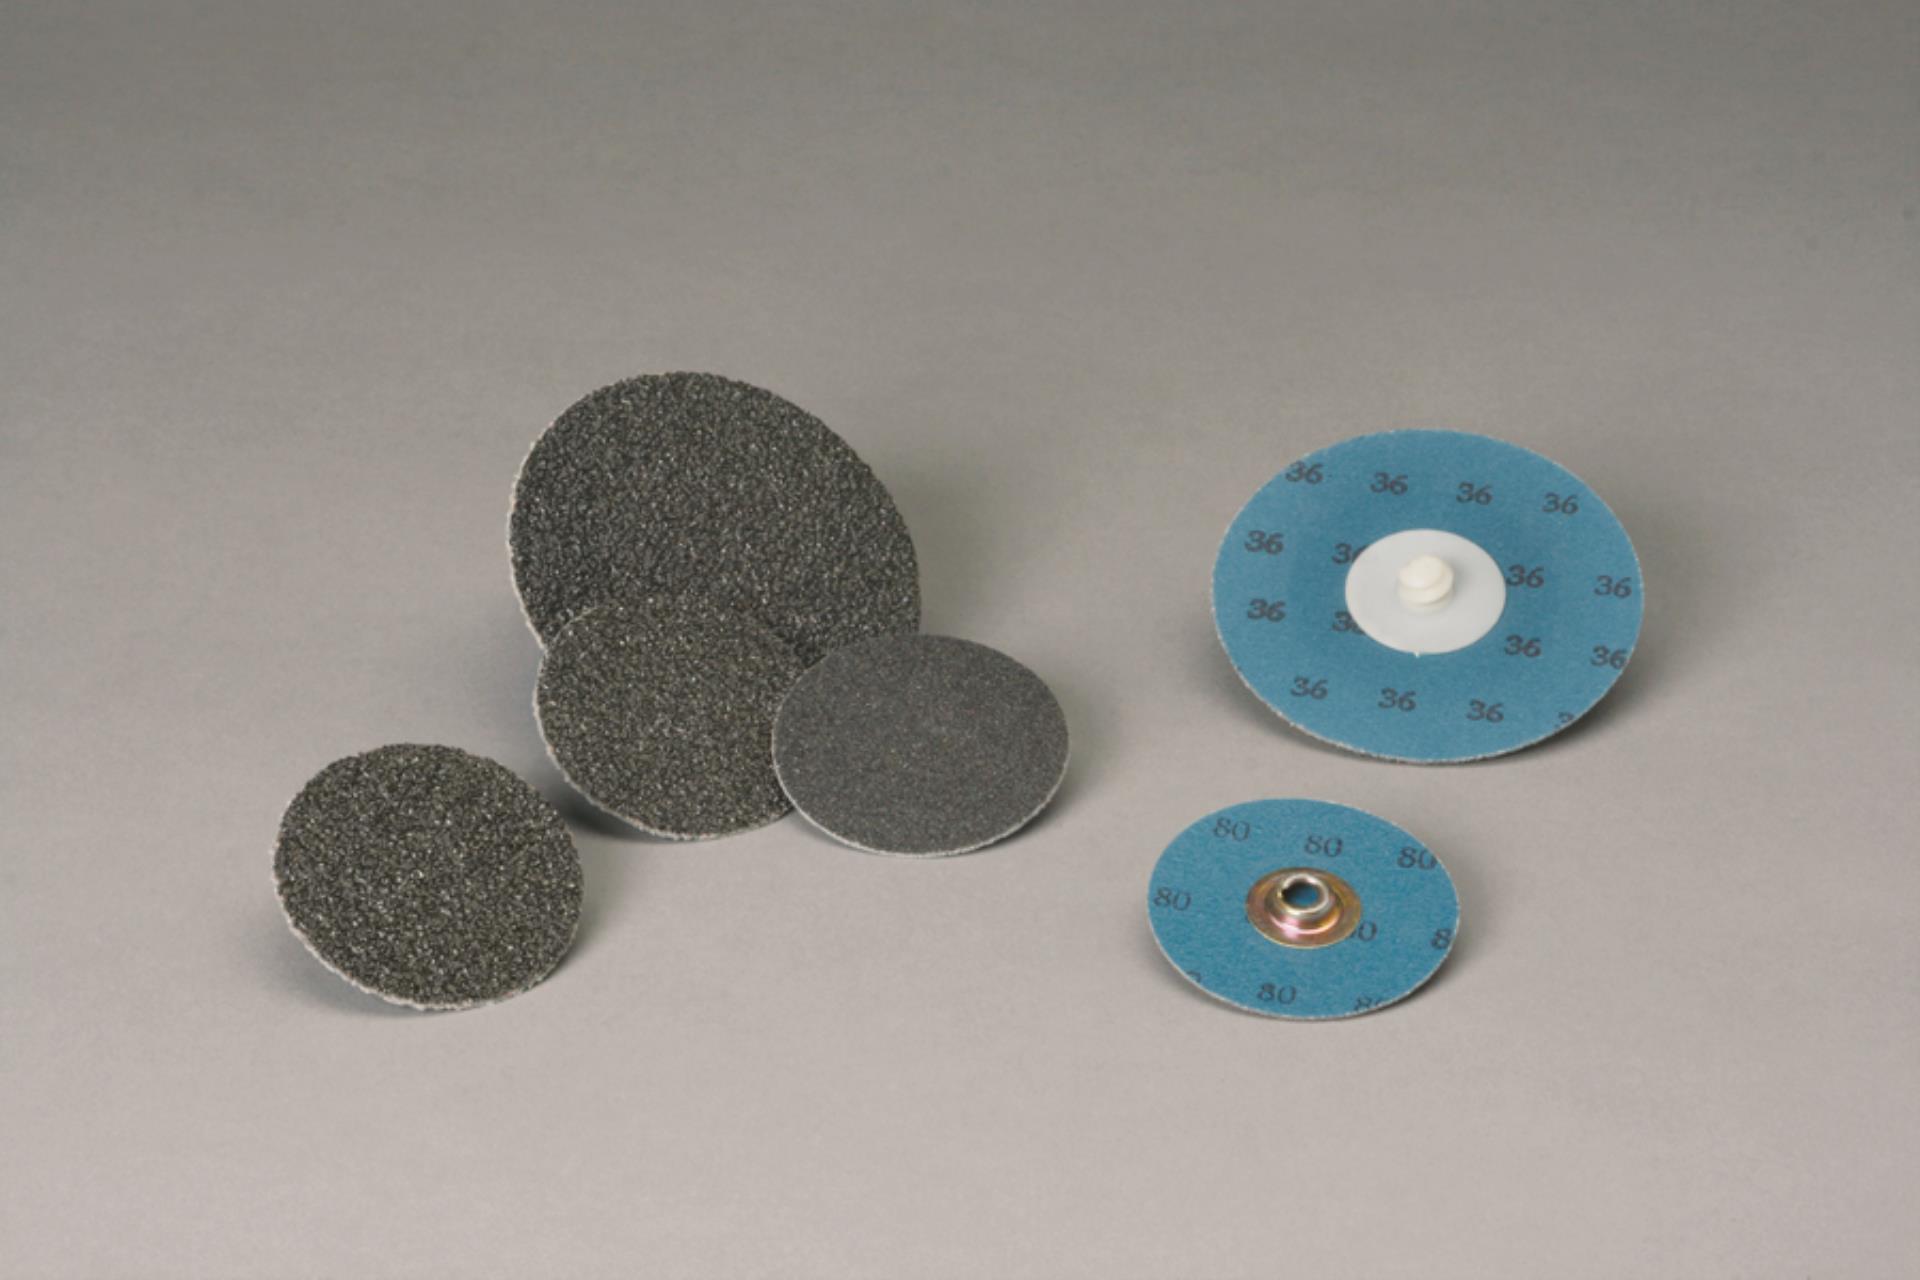 Standard Abrasives Surface Conditioning GP Disc 845518 4 in MED 3M 